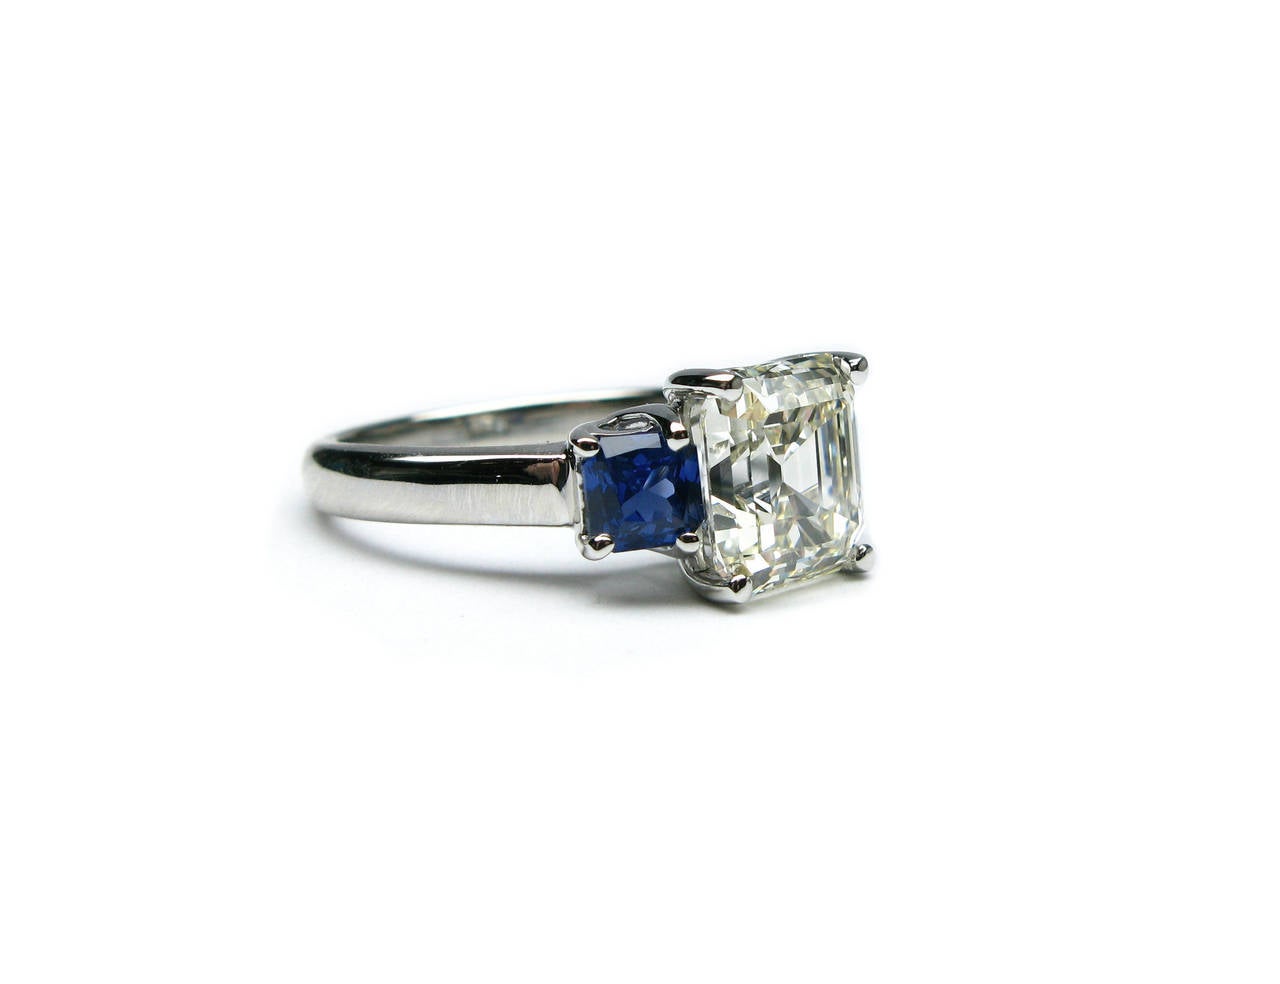 This  EGLUSA certified, 2.75Ct, J/K color, VS2 clarity Asscher cut diamond ring is set in platinum and flanked by two lovely vivid blue sapphires weighing approximately 1.00Ctw. The unexpected pop of color the sapphires contribute to this ring make